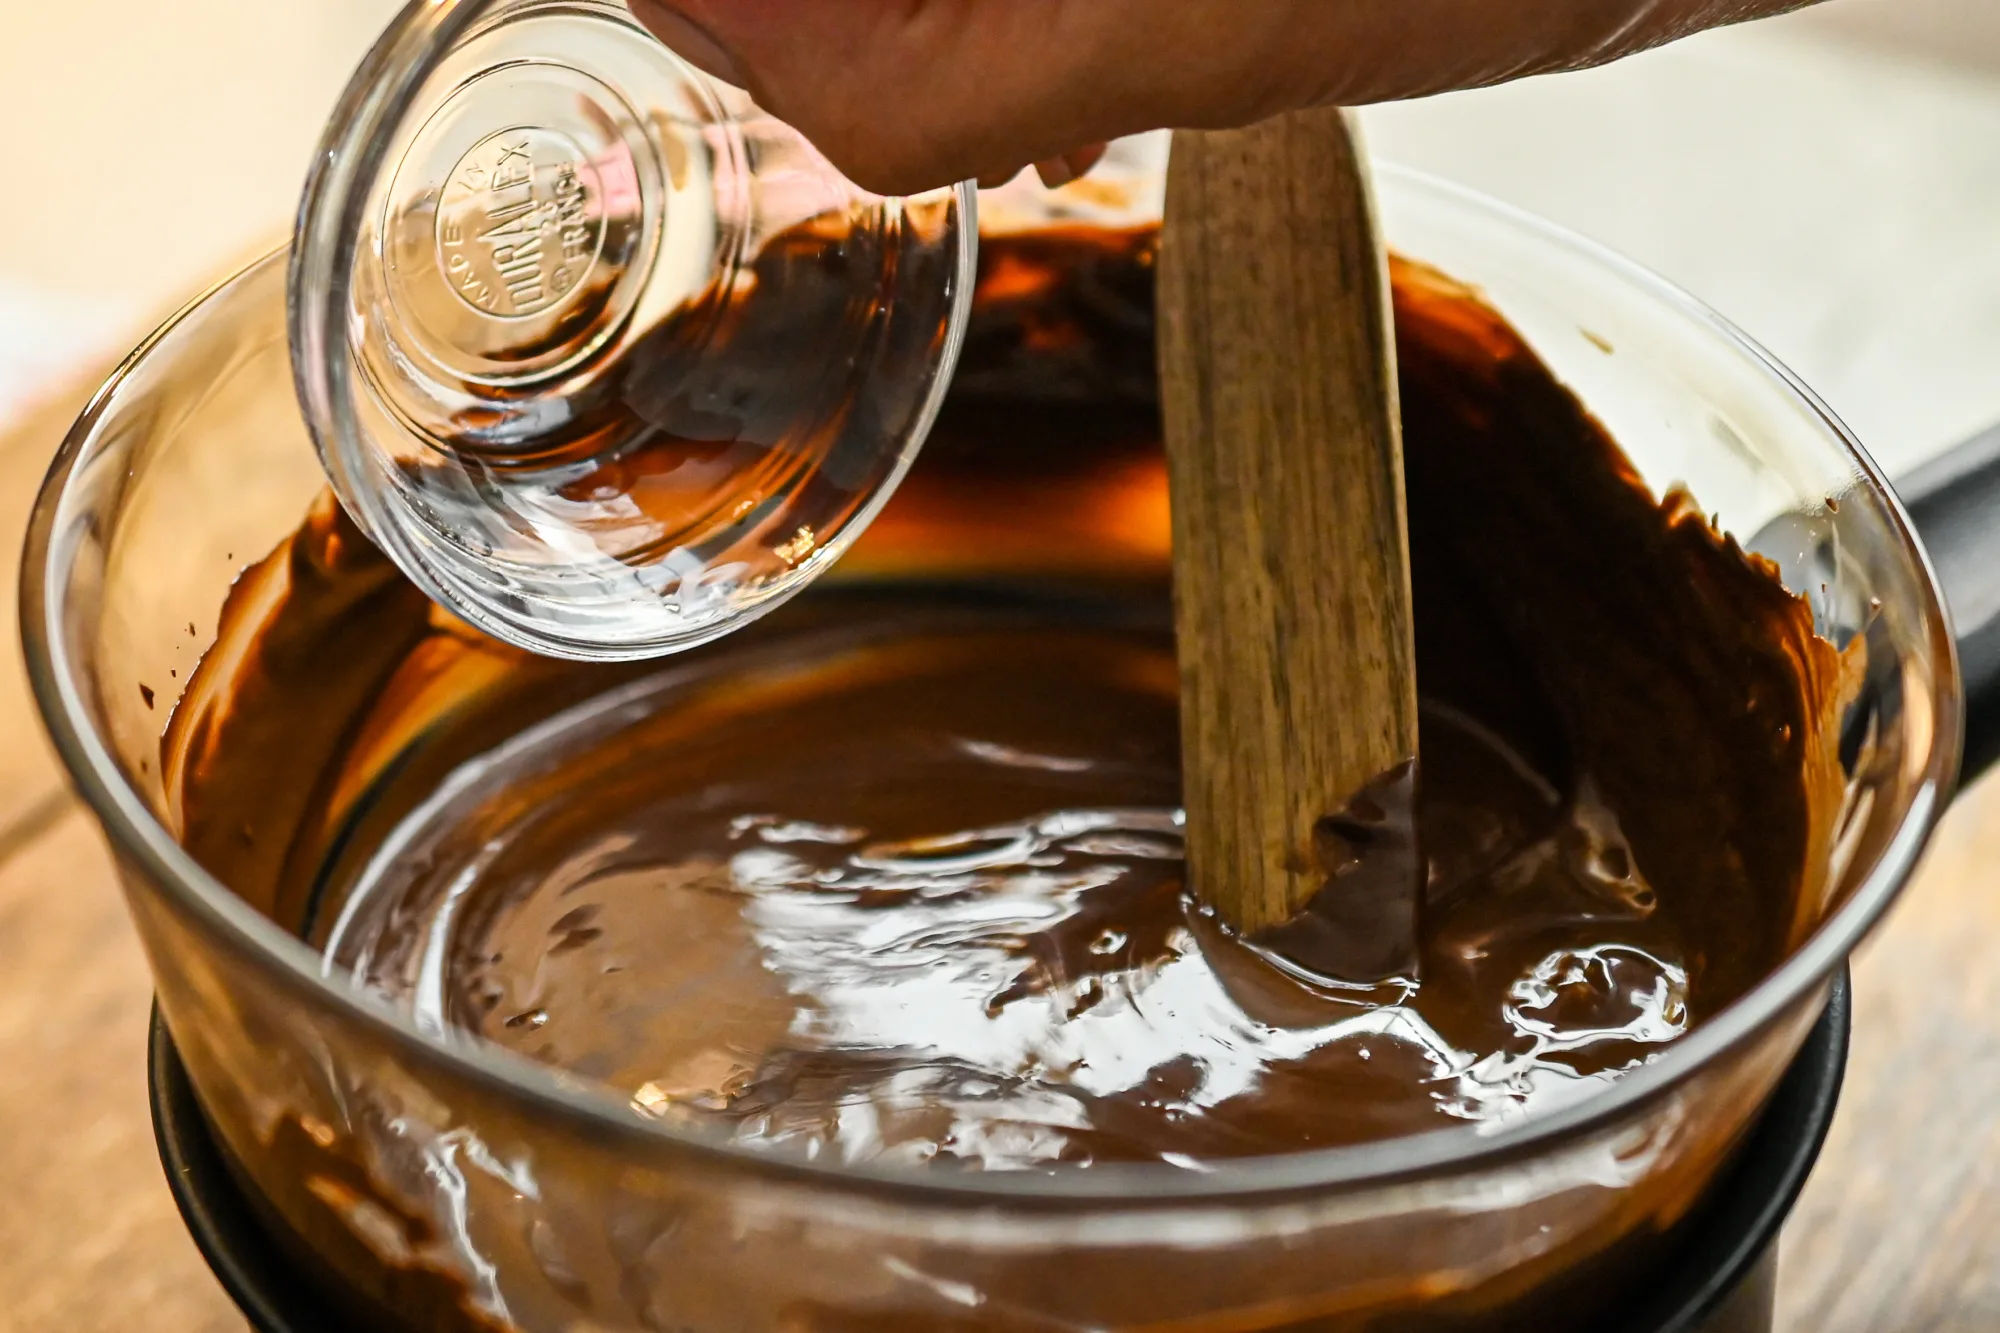 peppermint extract being added to melted chocolate